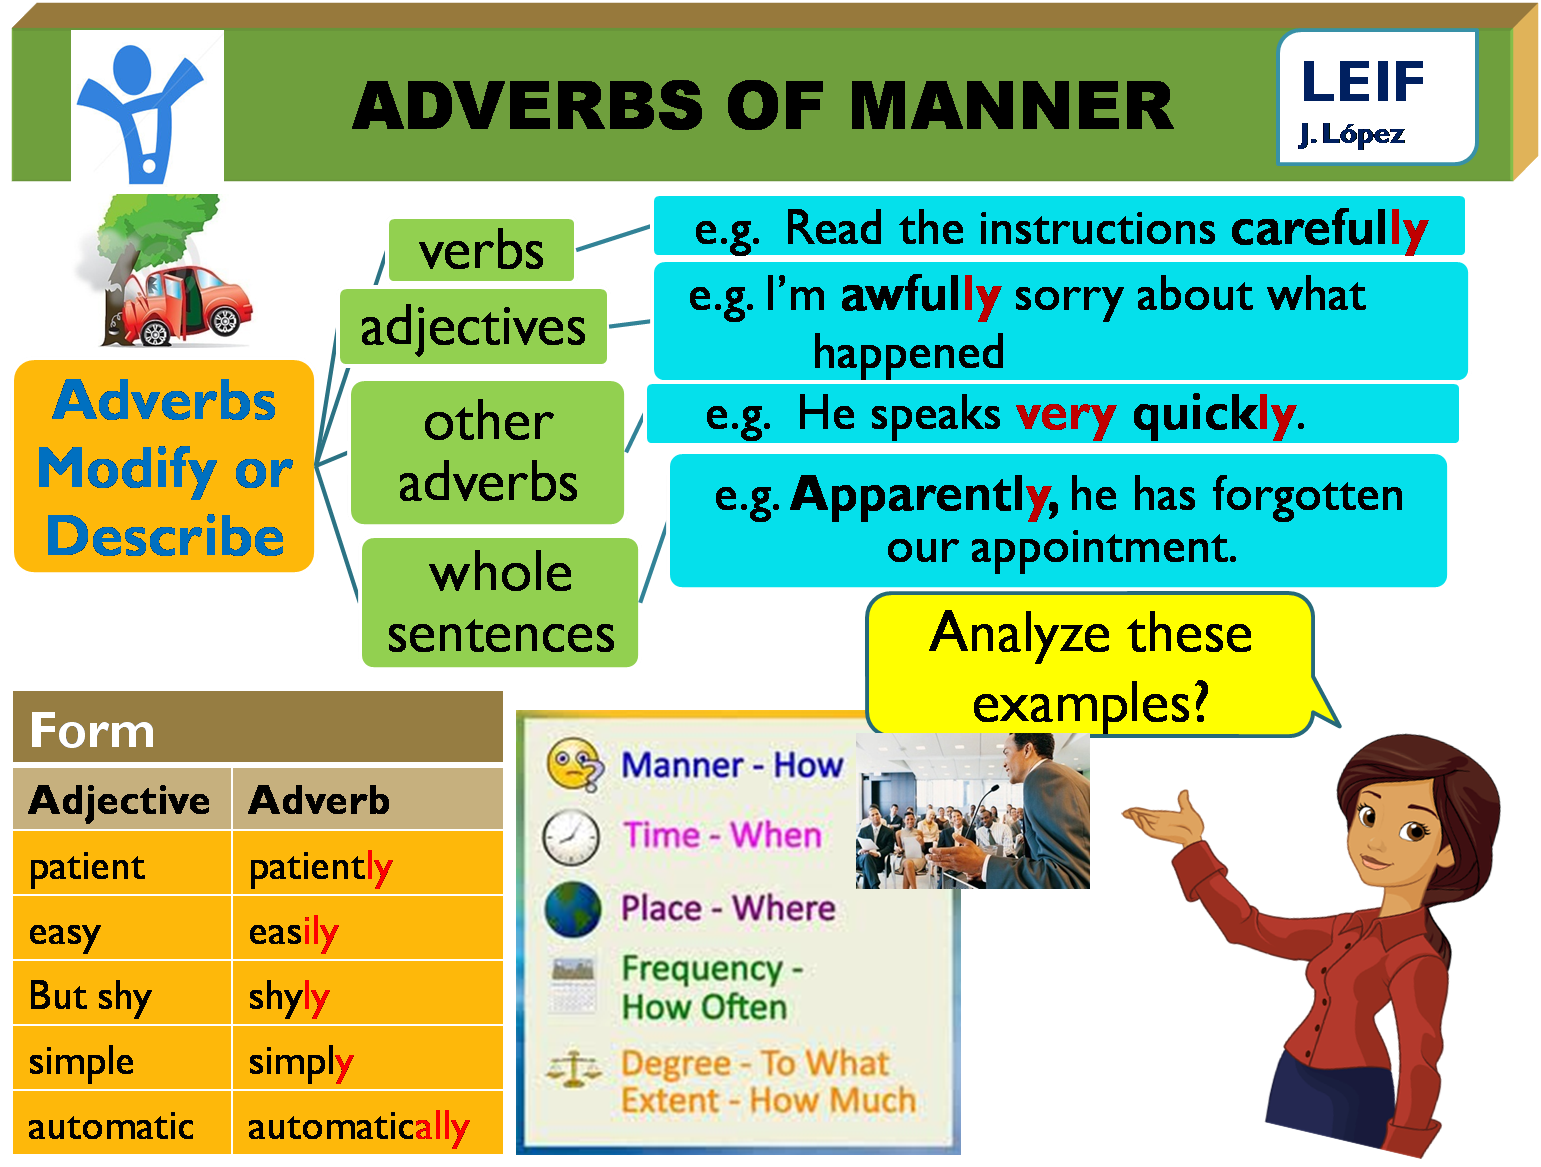 Adverbs careful. Adverbs of manner список. Adverbs of manner правило. Adverbs правило. Adverbs в английском.